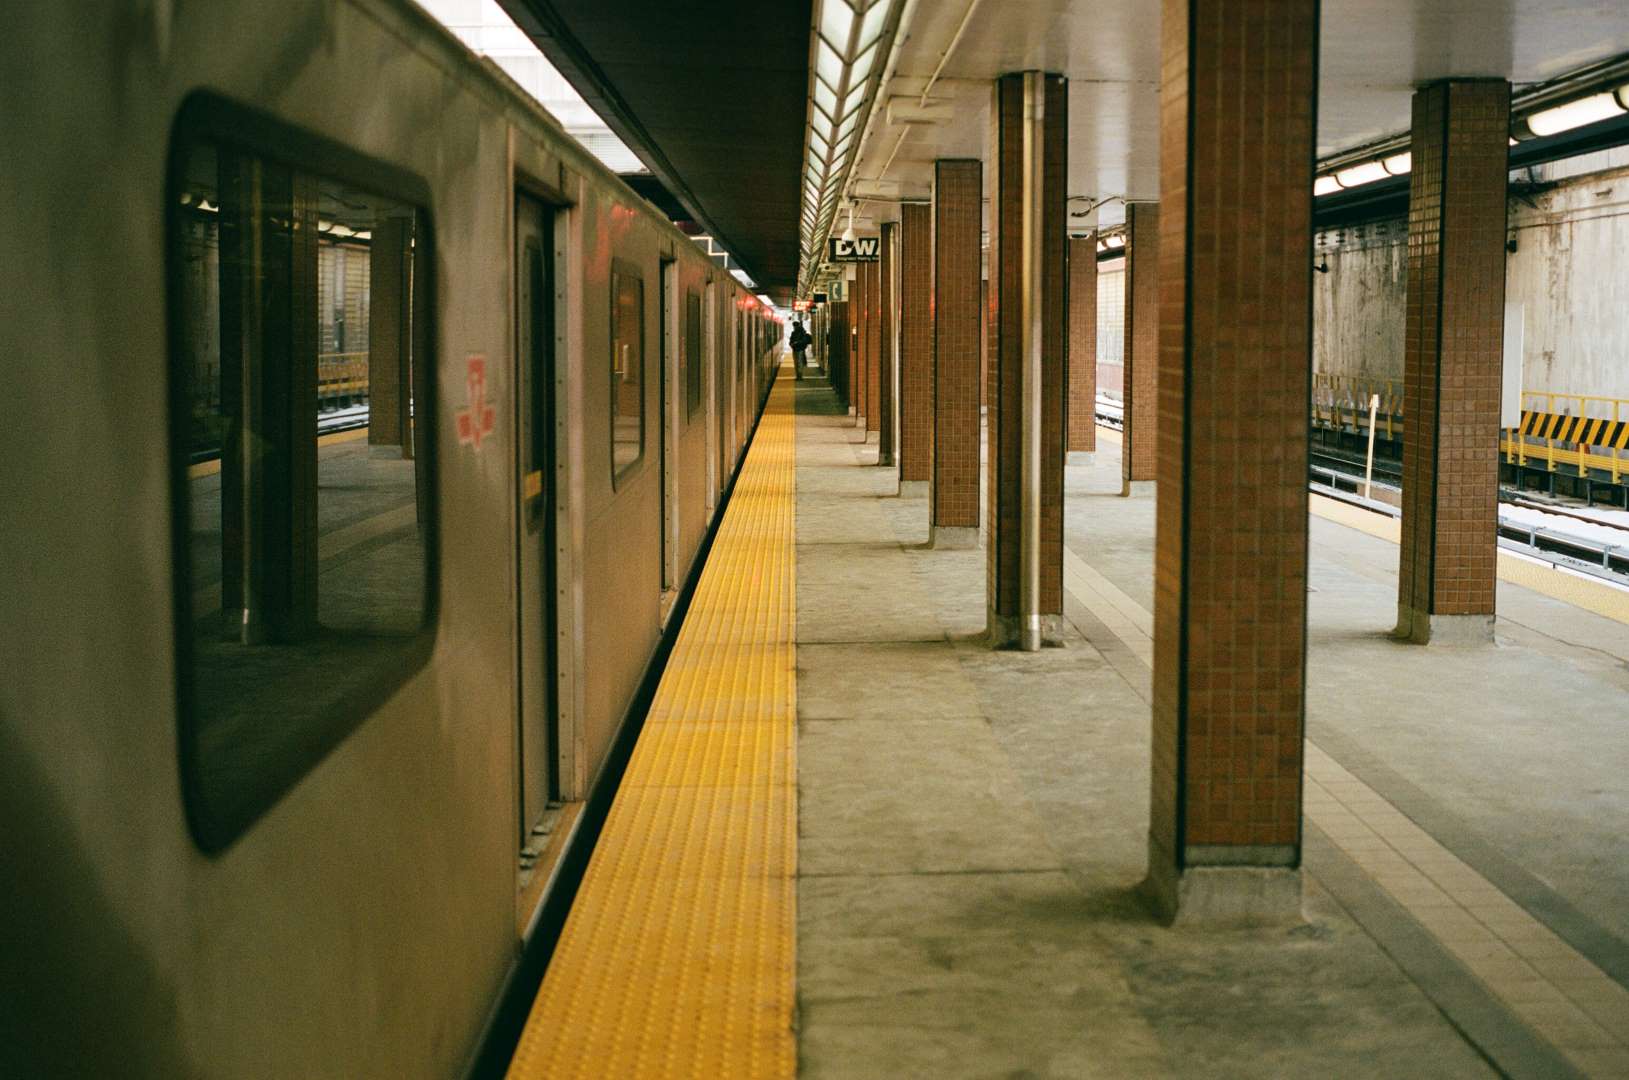 A colour photograph of a subway platform as the train pulls away